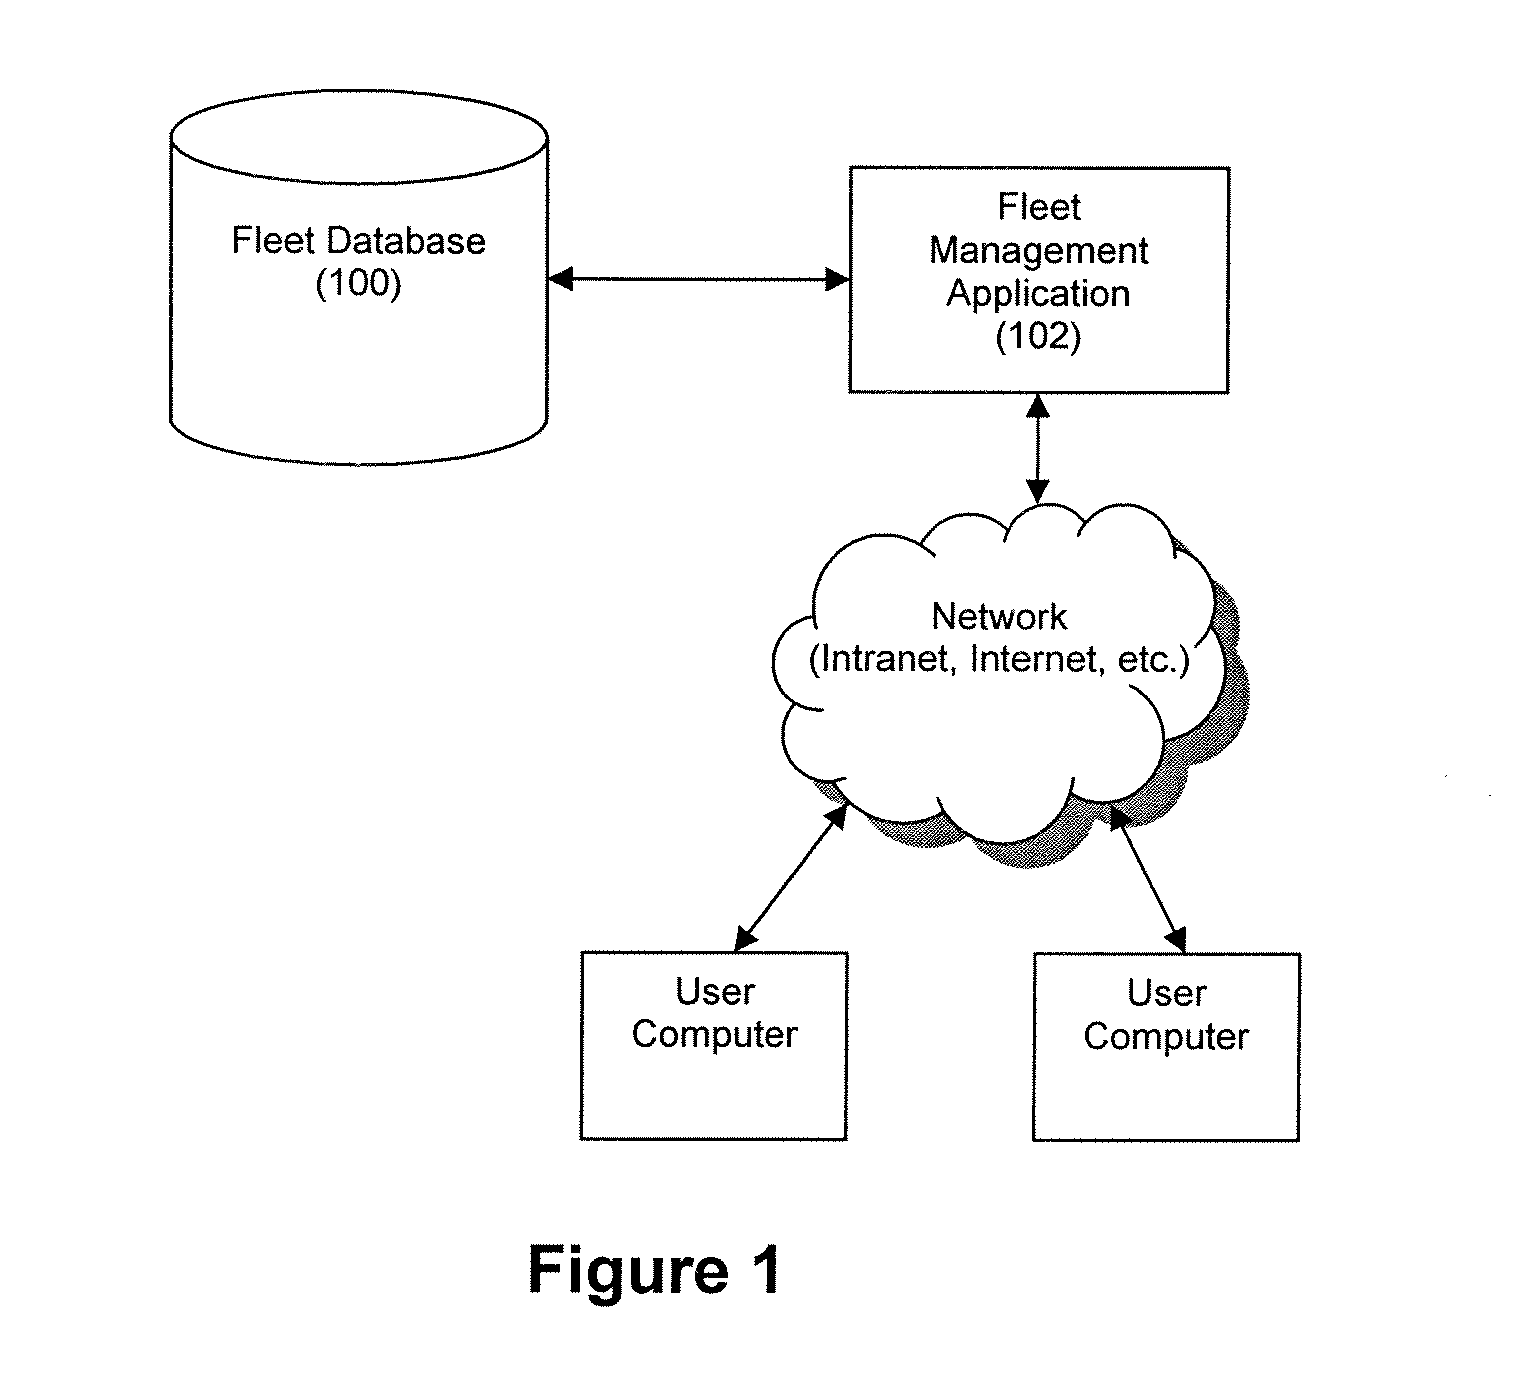 Method And System For Improved User Management Of A Fleet Of Vehicles